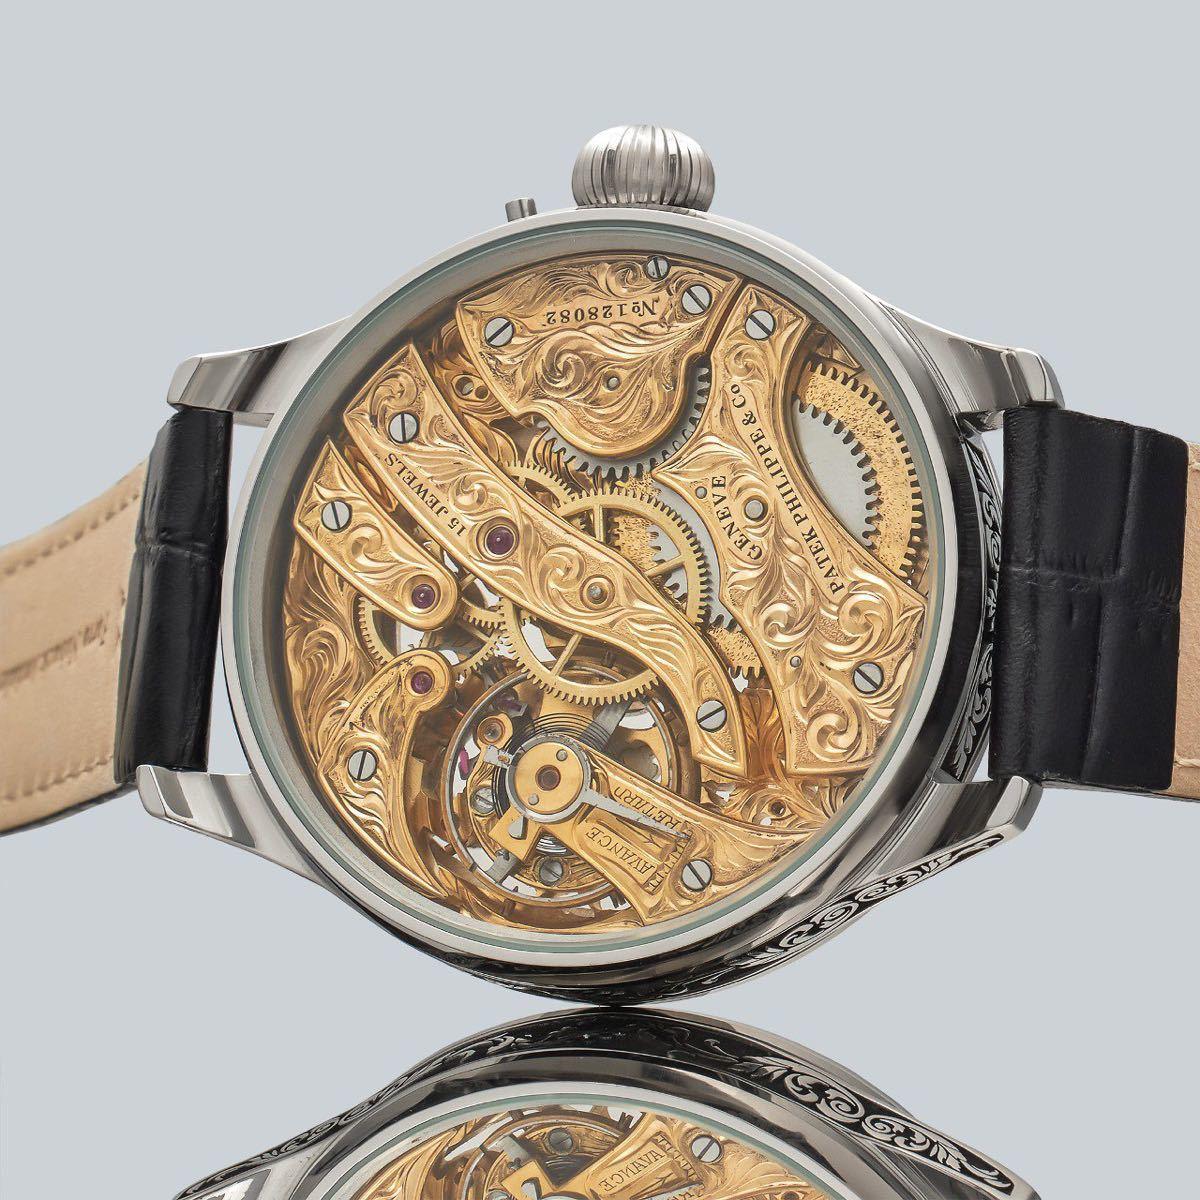 Marriage watch Patek Philippe 48mm men's watch with a pocket watch Manual winding skeleton - Murphy Johnson Watches Co.